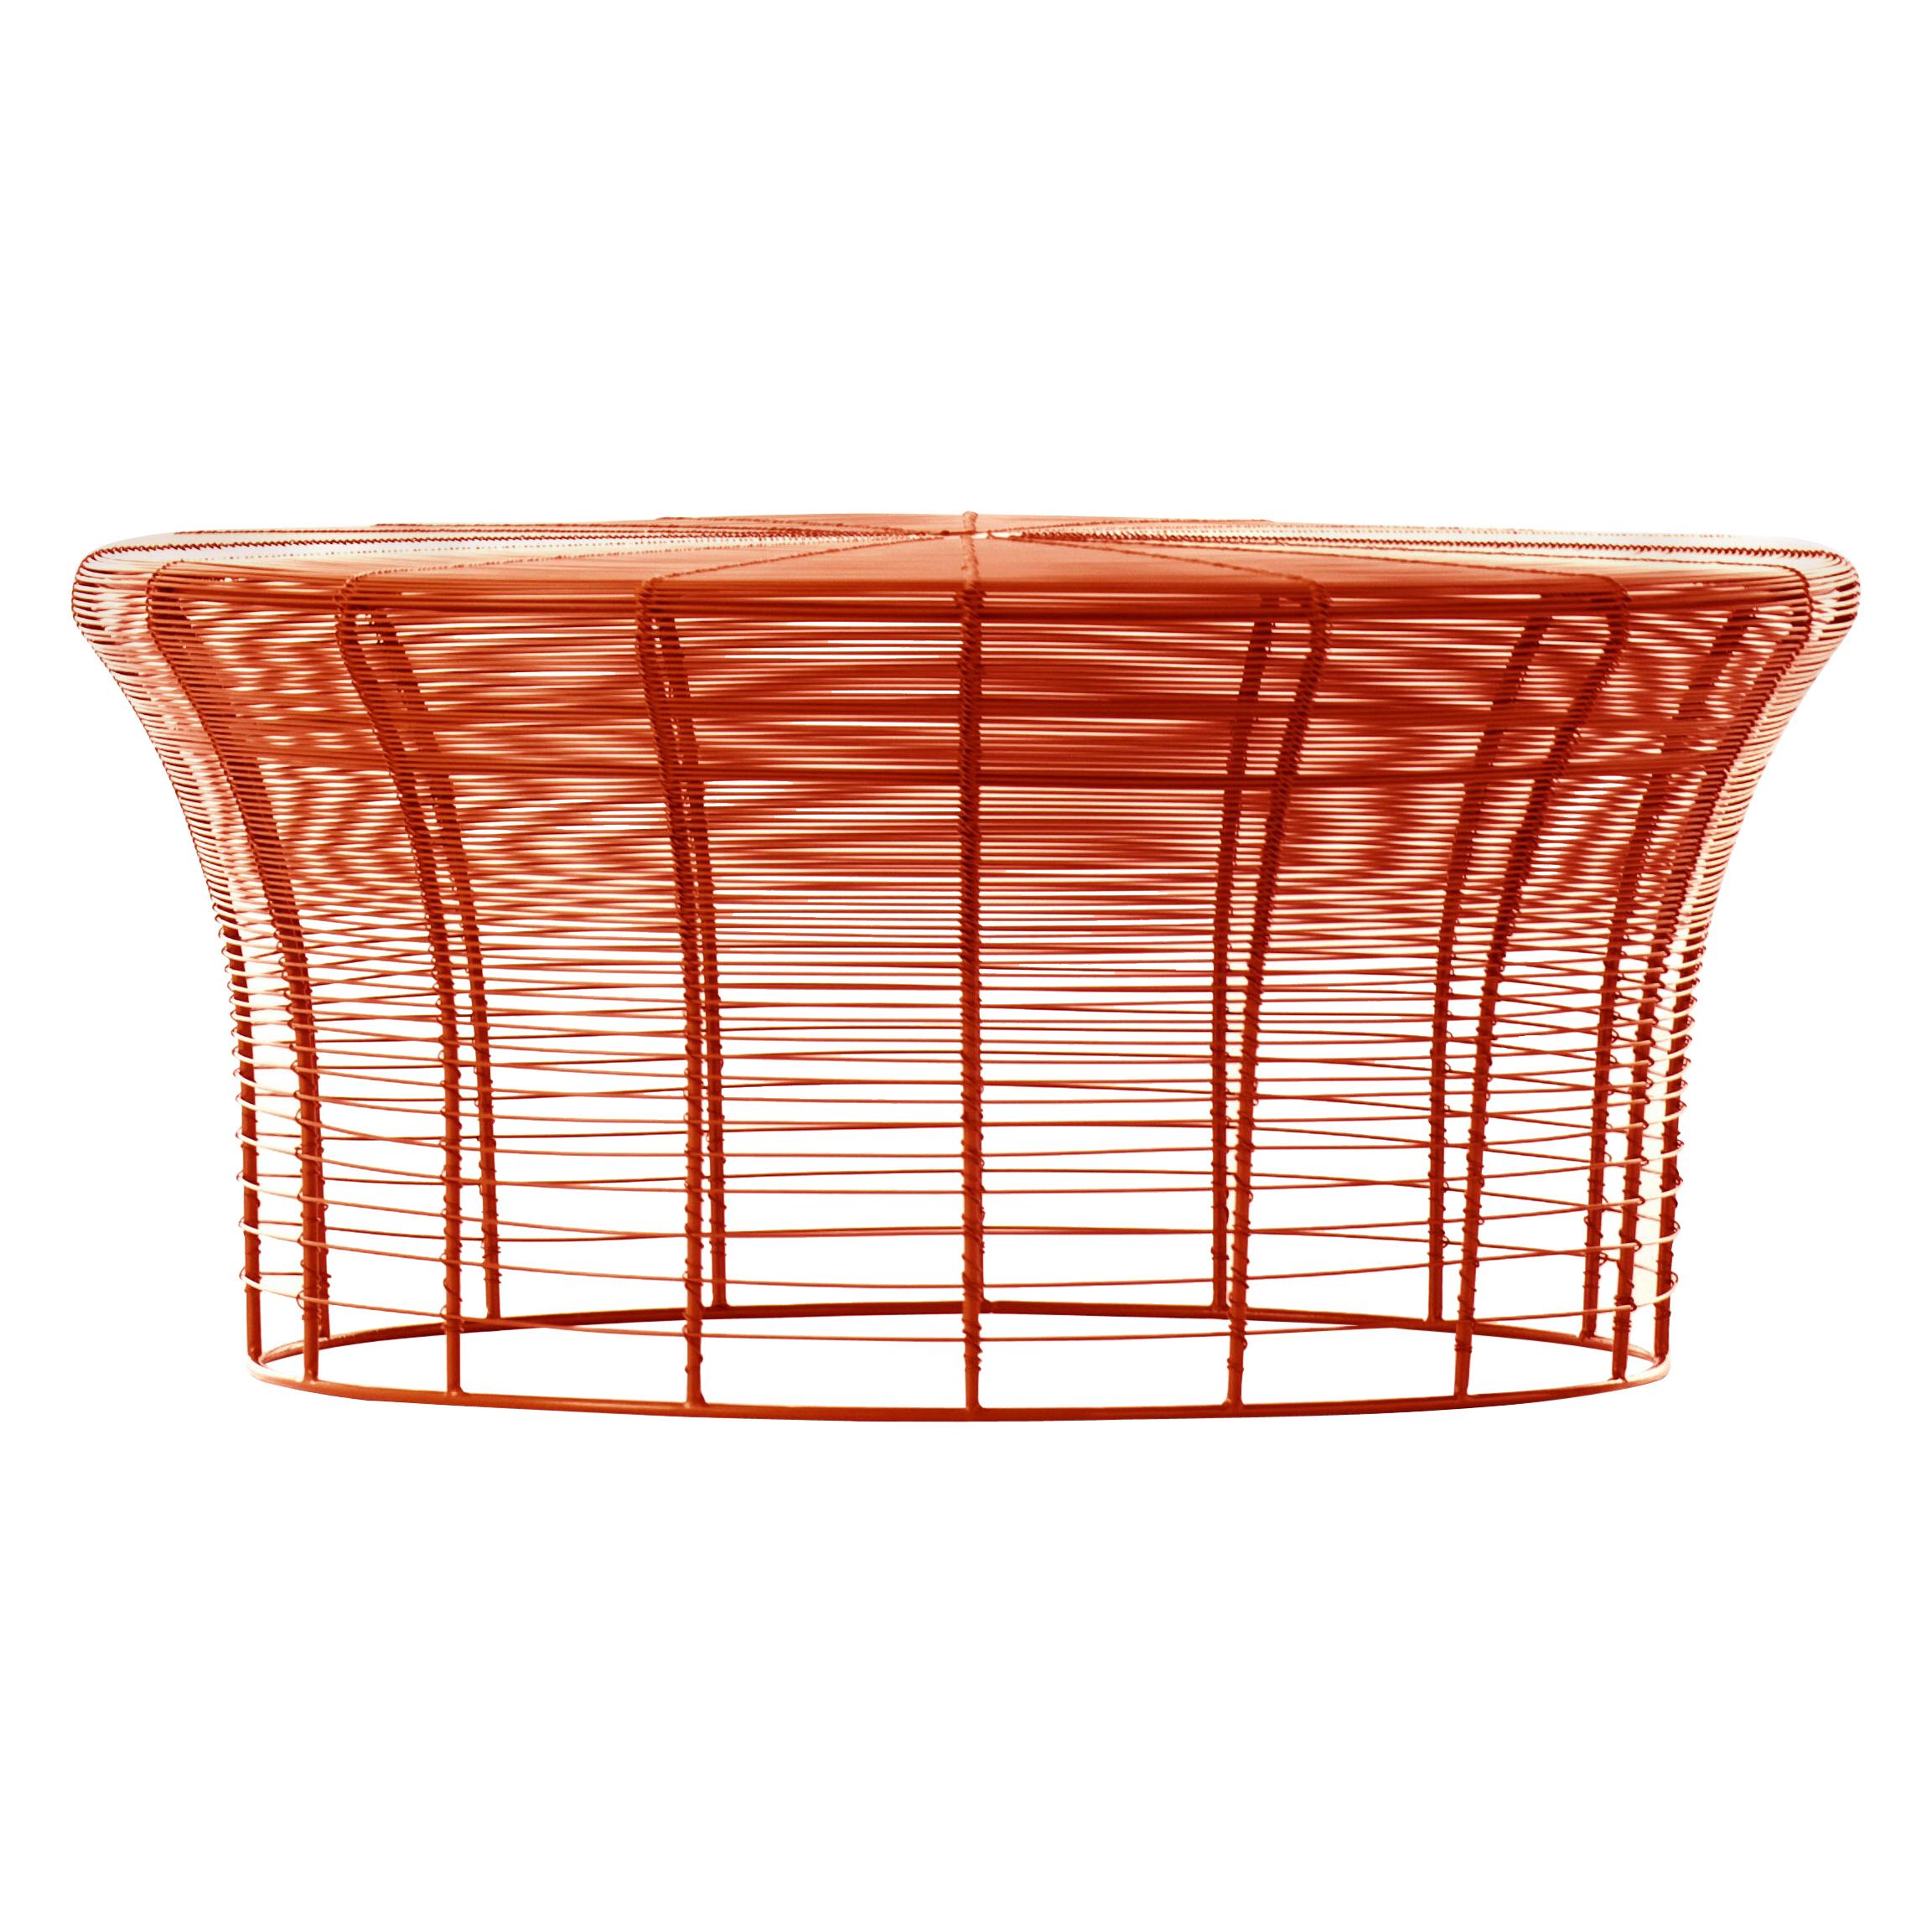 GAN Aram Low Table in Red and Orange by Nendo For Sale